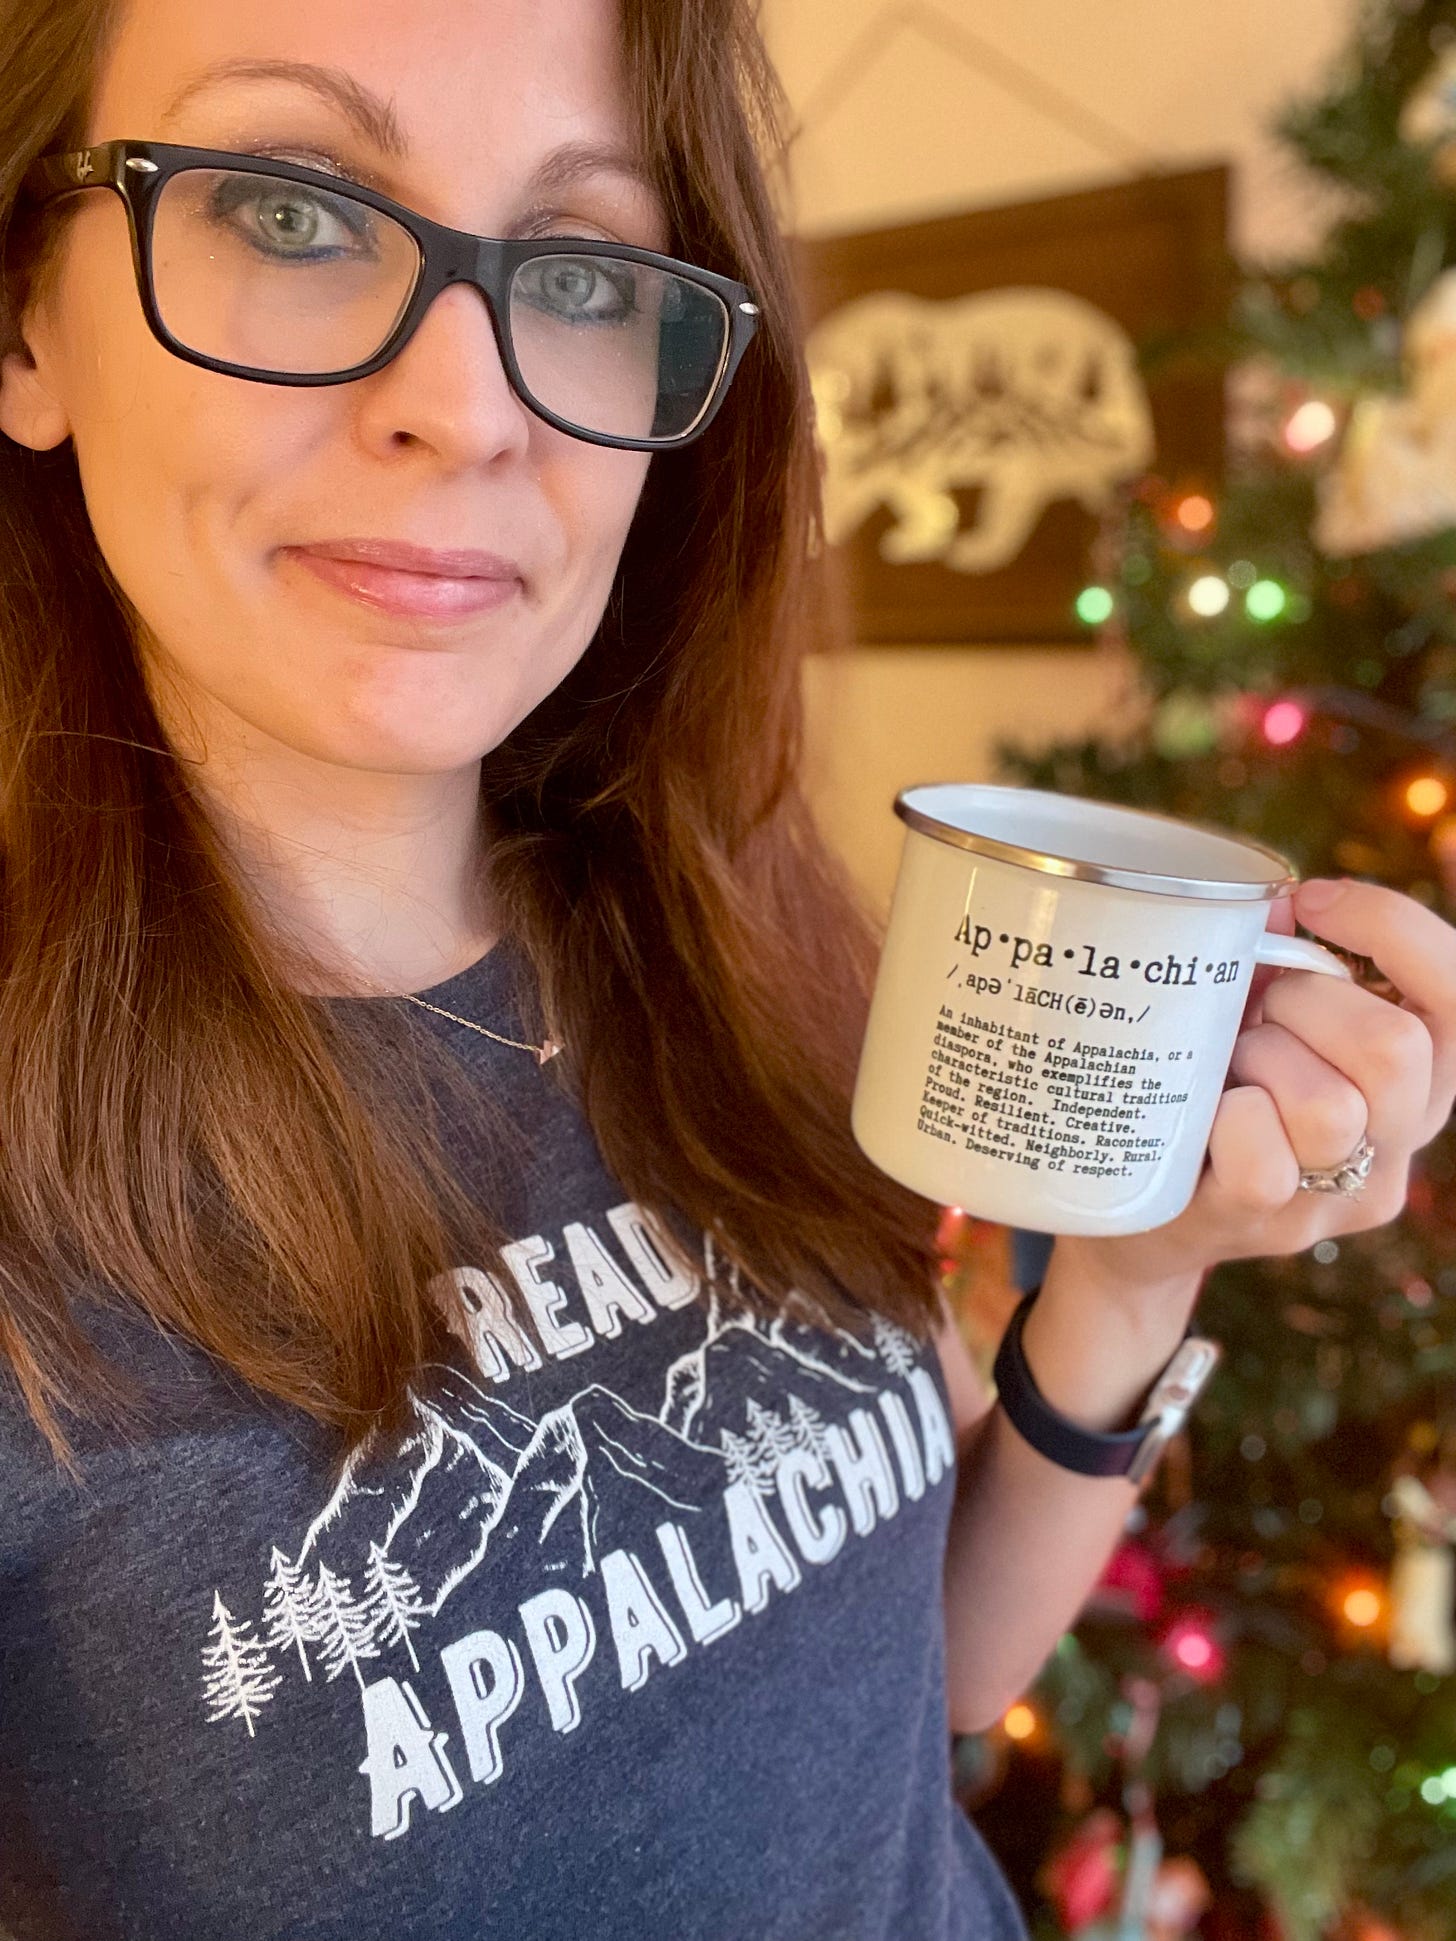 a photo of Kendra, a white woman with brunette hair wearing black glasses. She's wearing a Read Appalachia t-shirt and holding a mug that says Appalachia